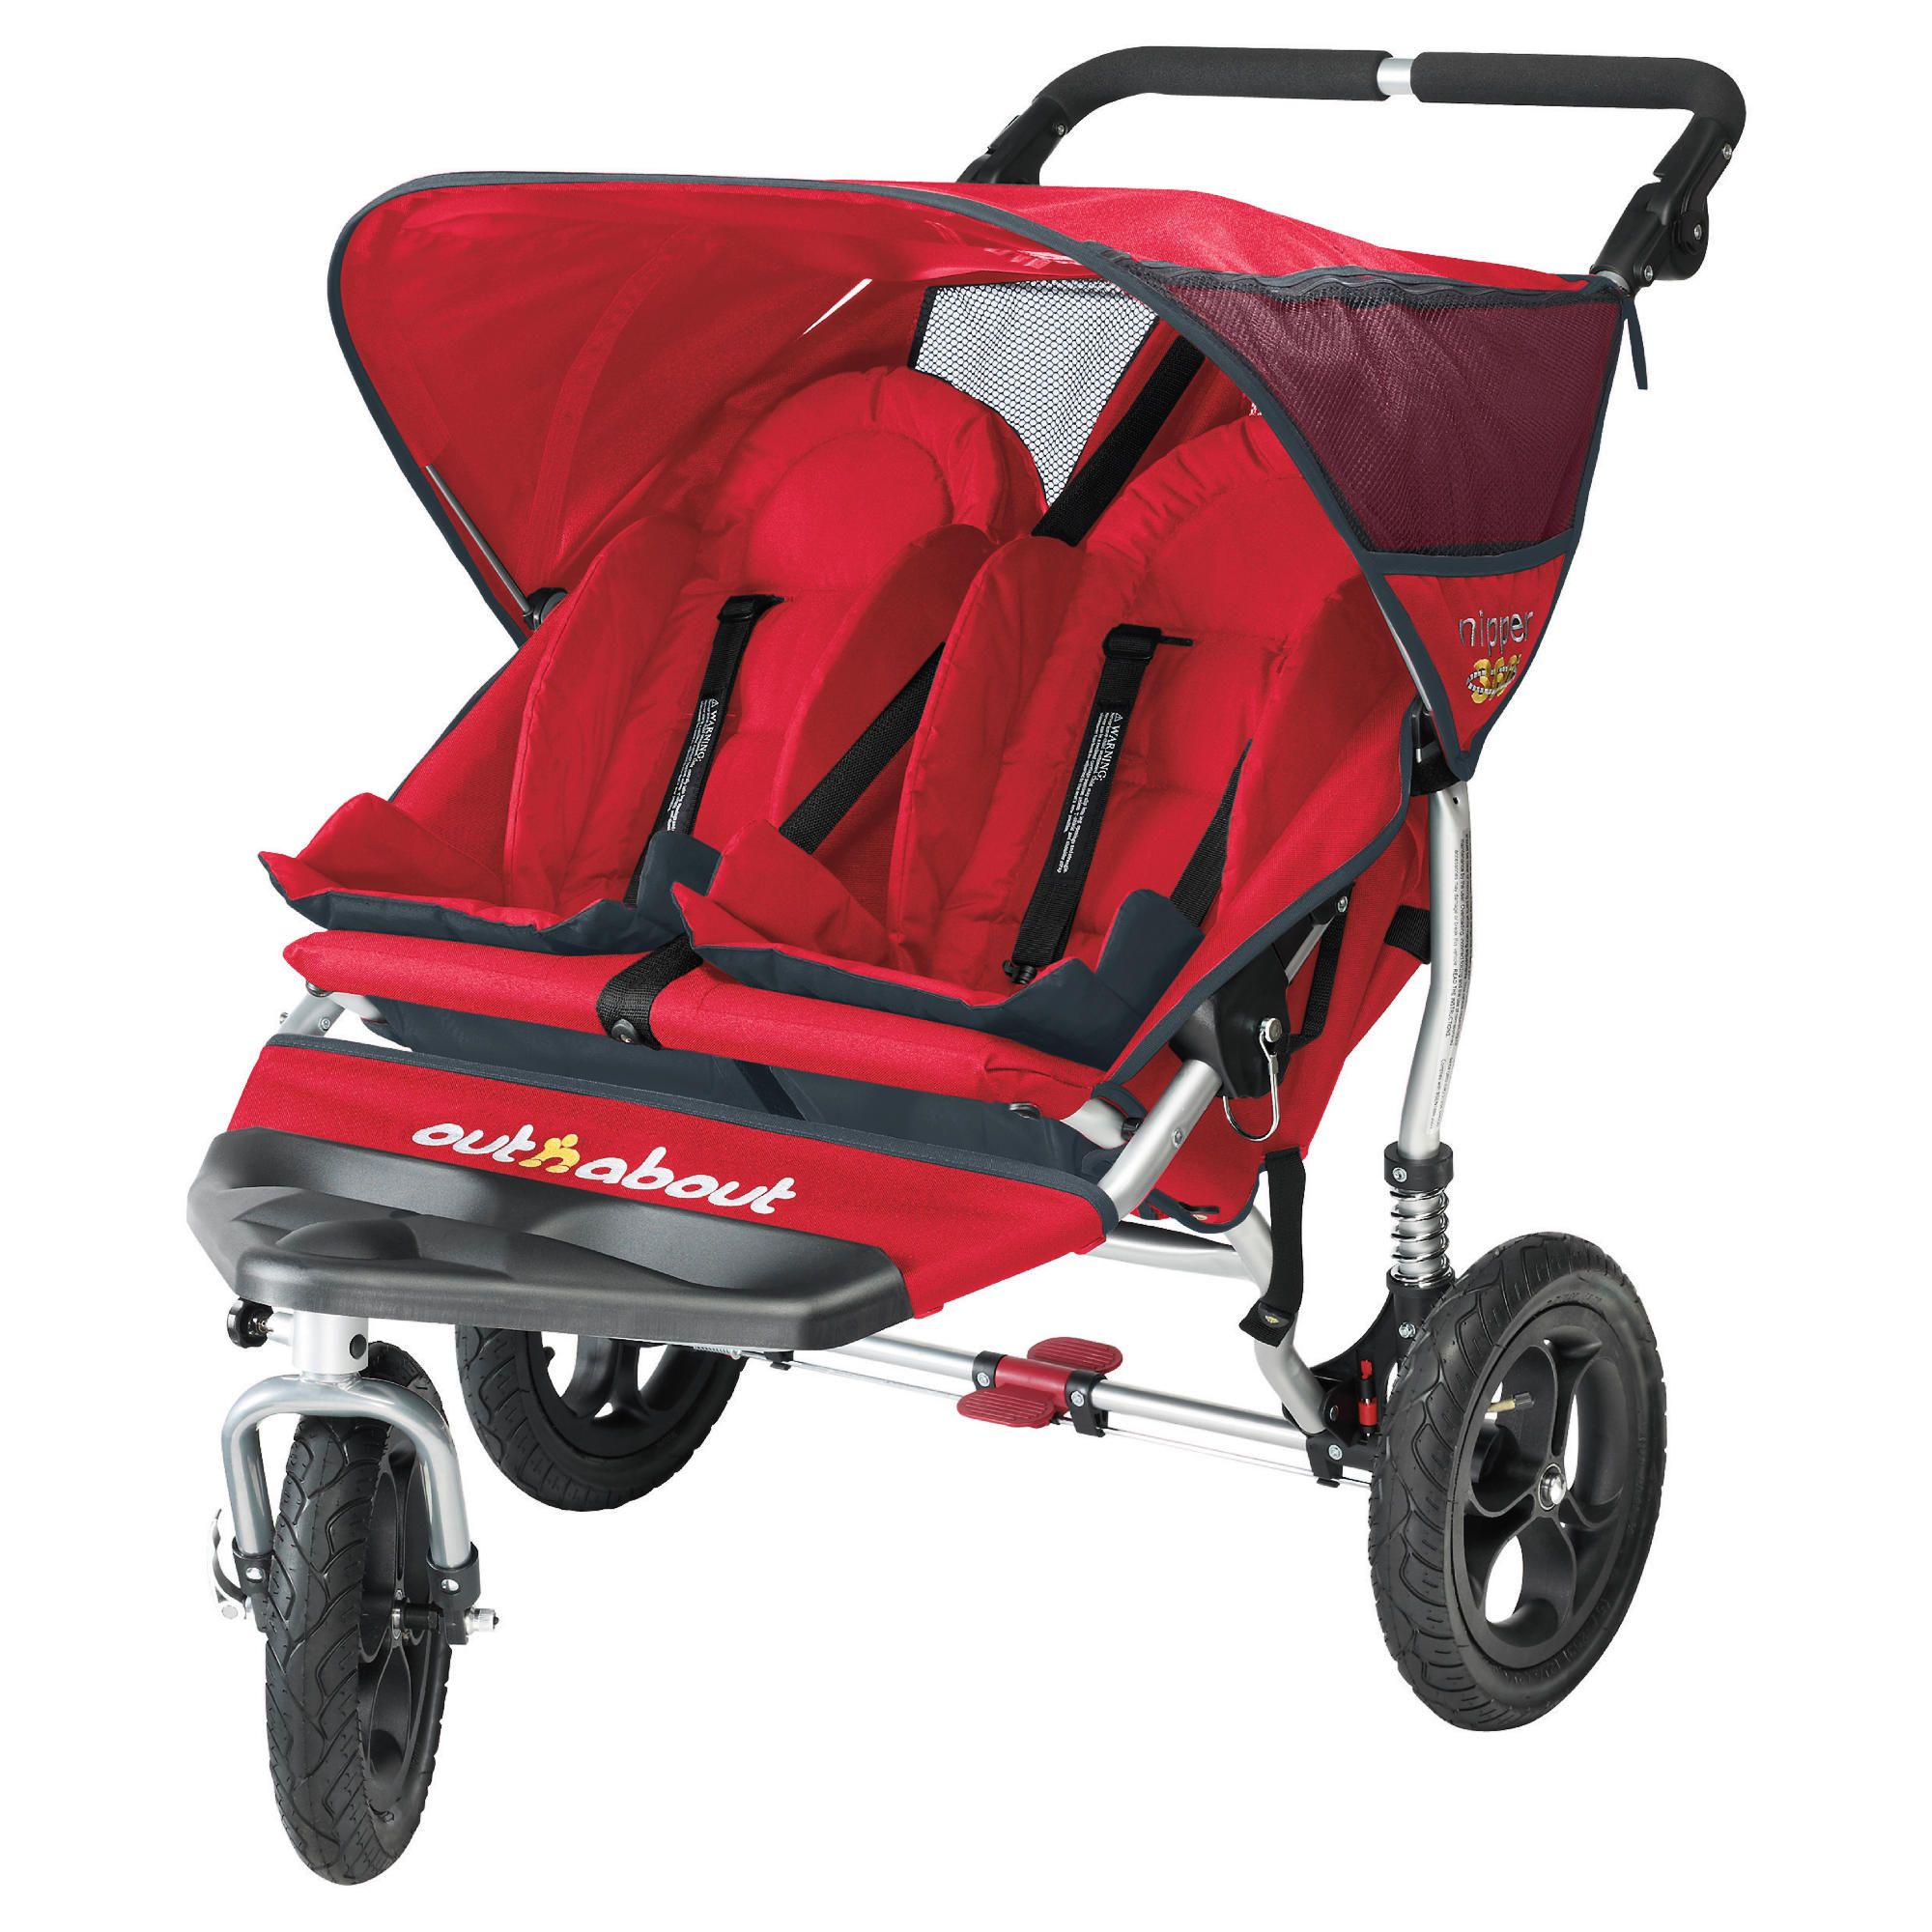 Out 'n' About V2 Nipper 360, 3 wheeler Double Pushchair, Red at Tesco Direct